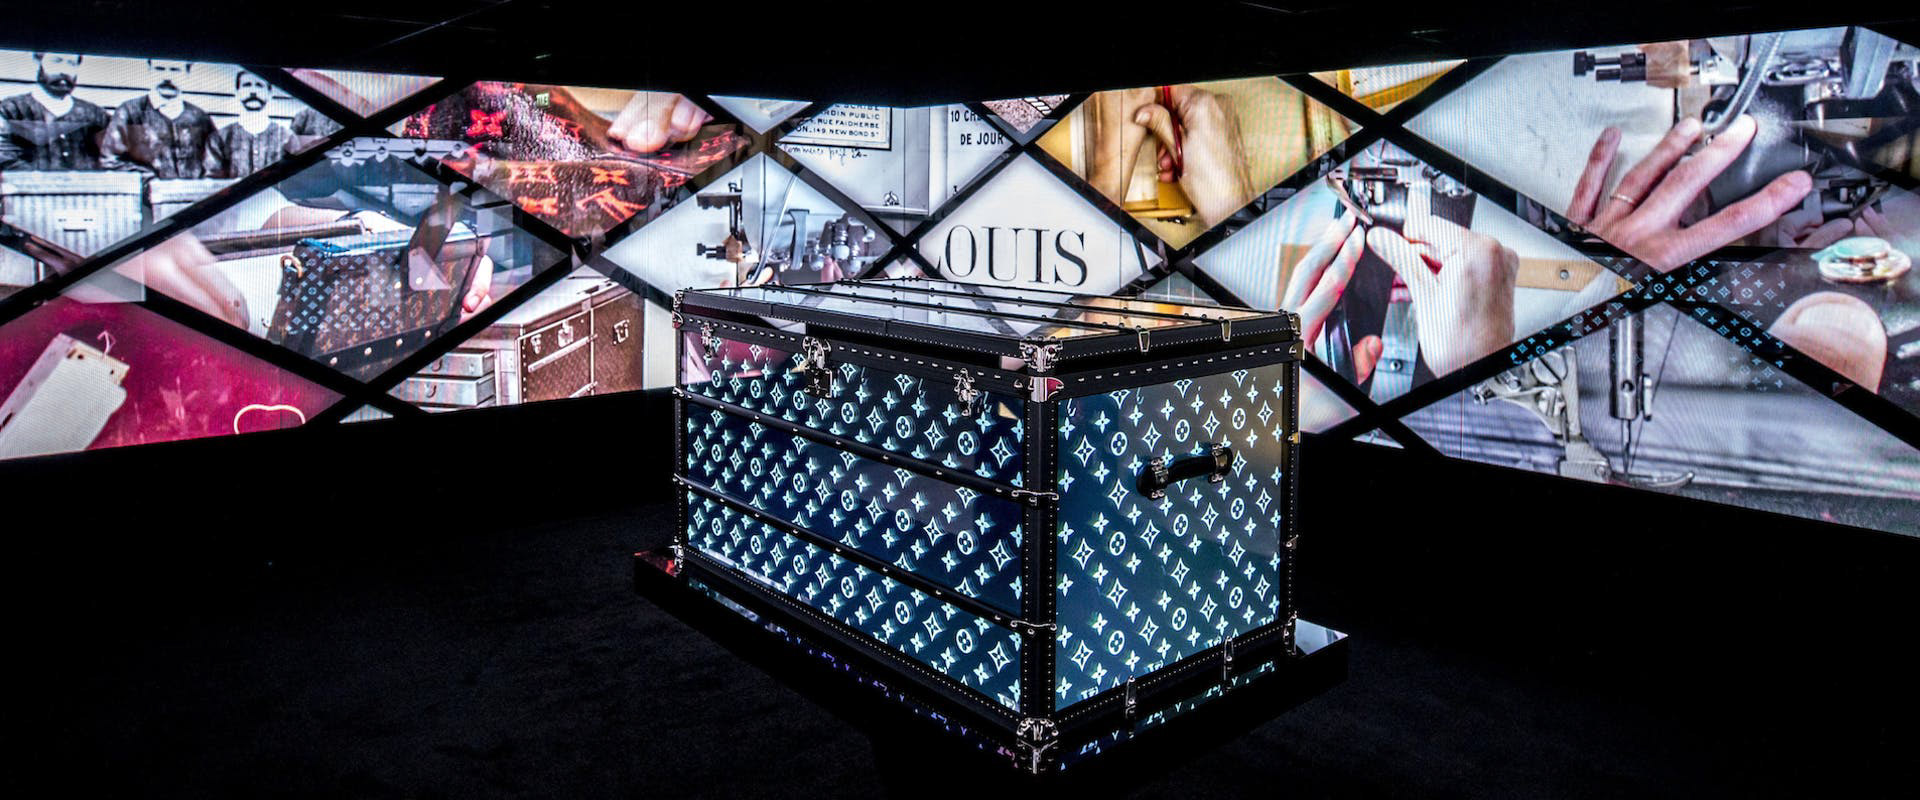 Louis Vuitton's Innovations in a 'Time Capsule' Exhibition